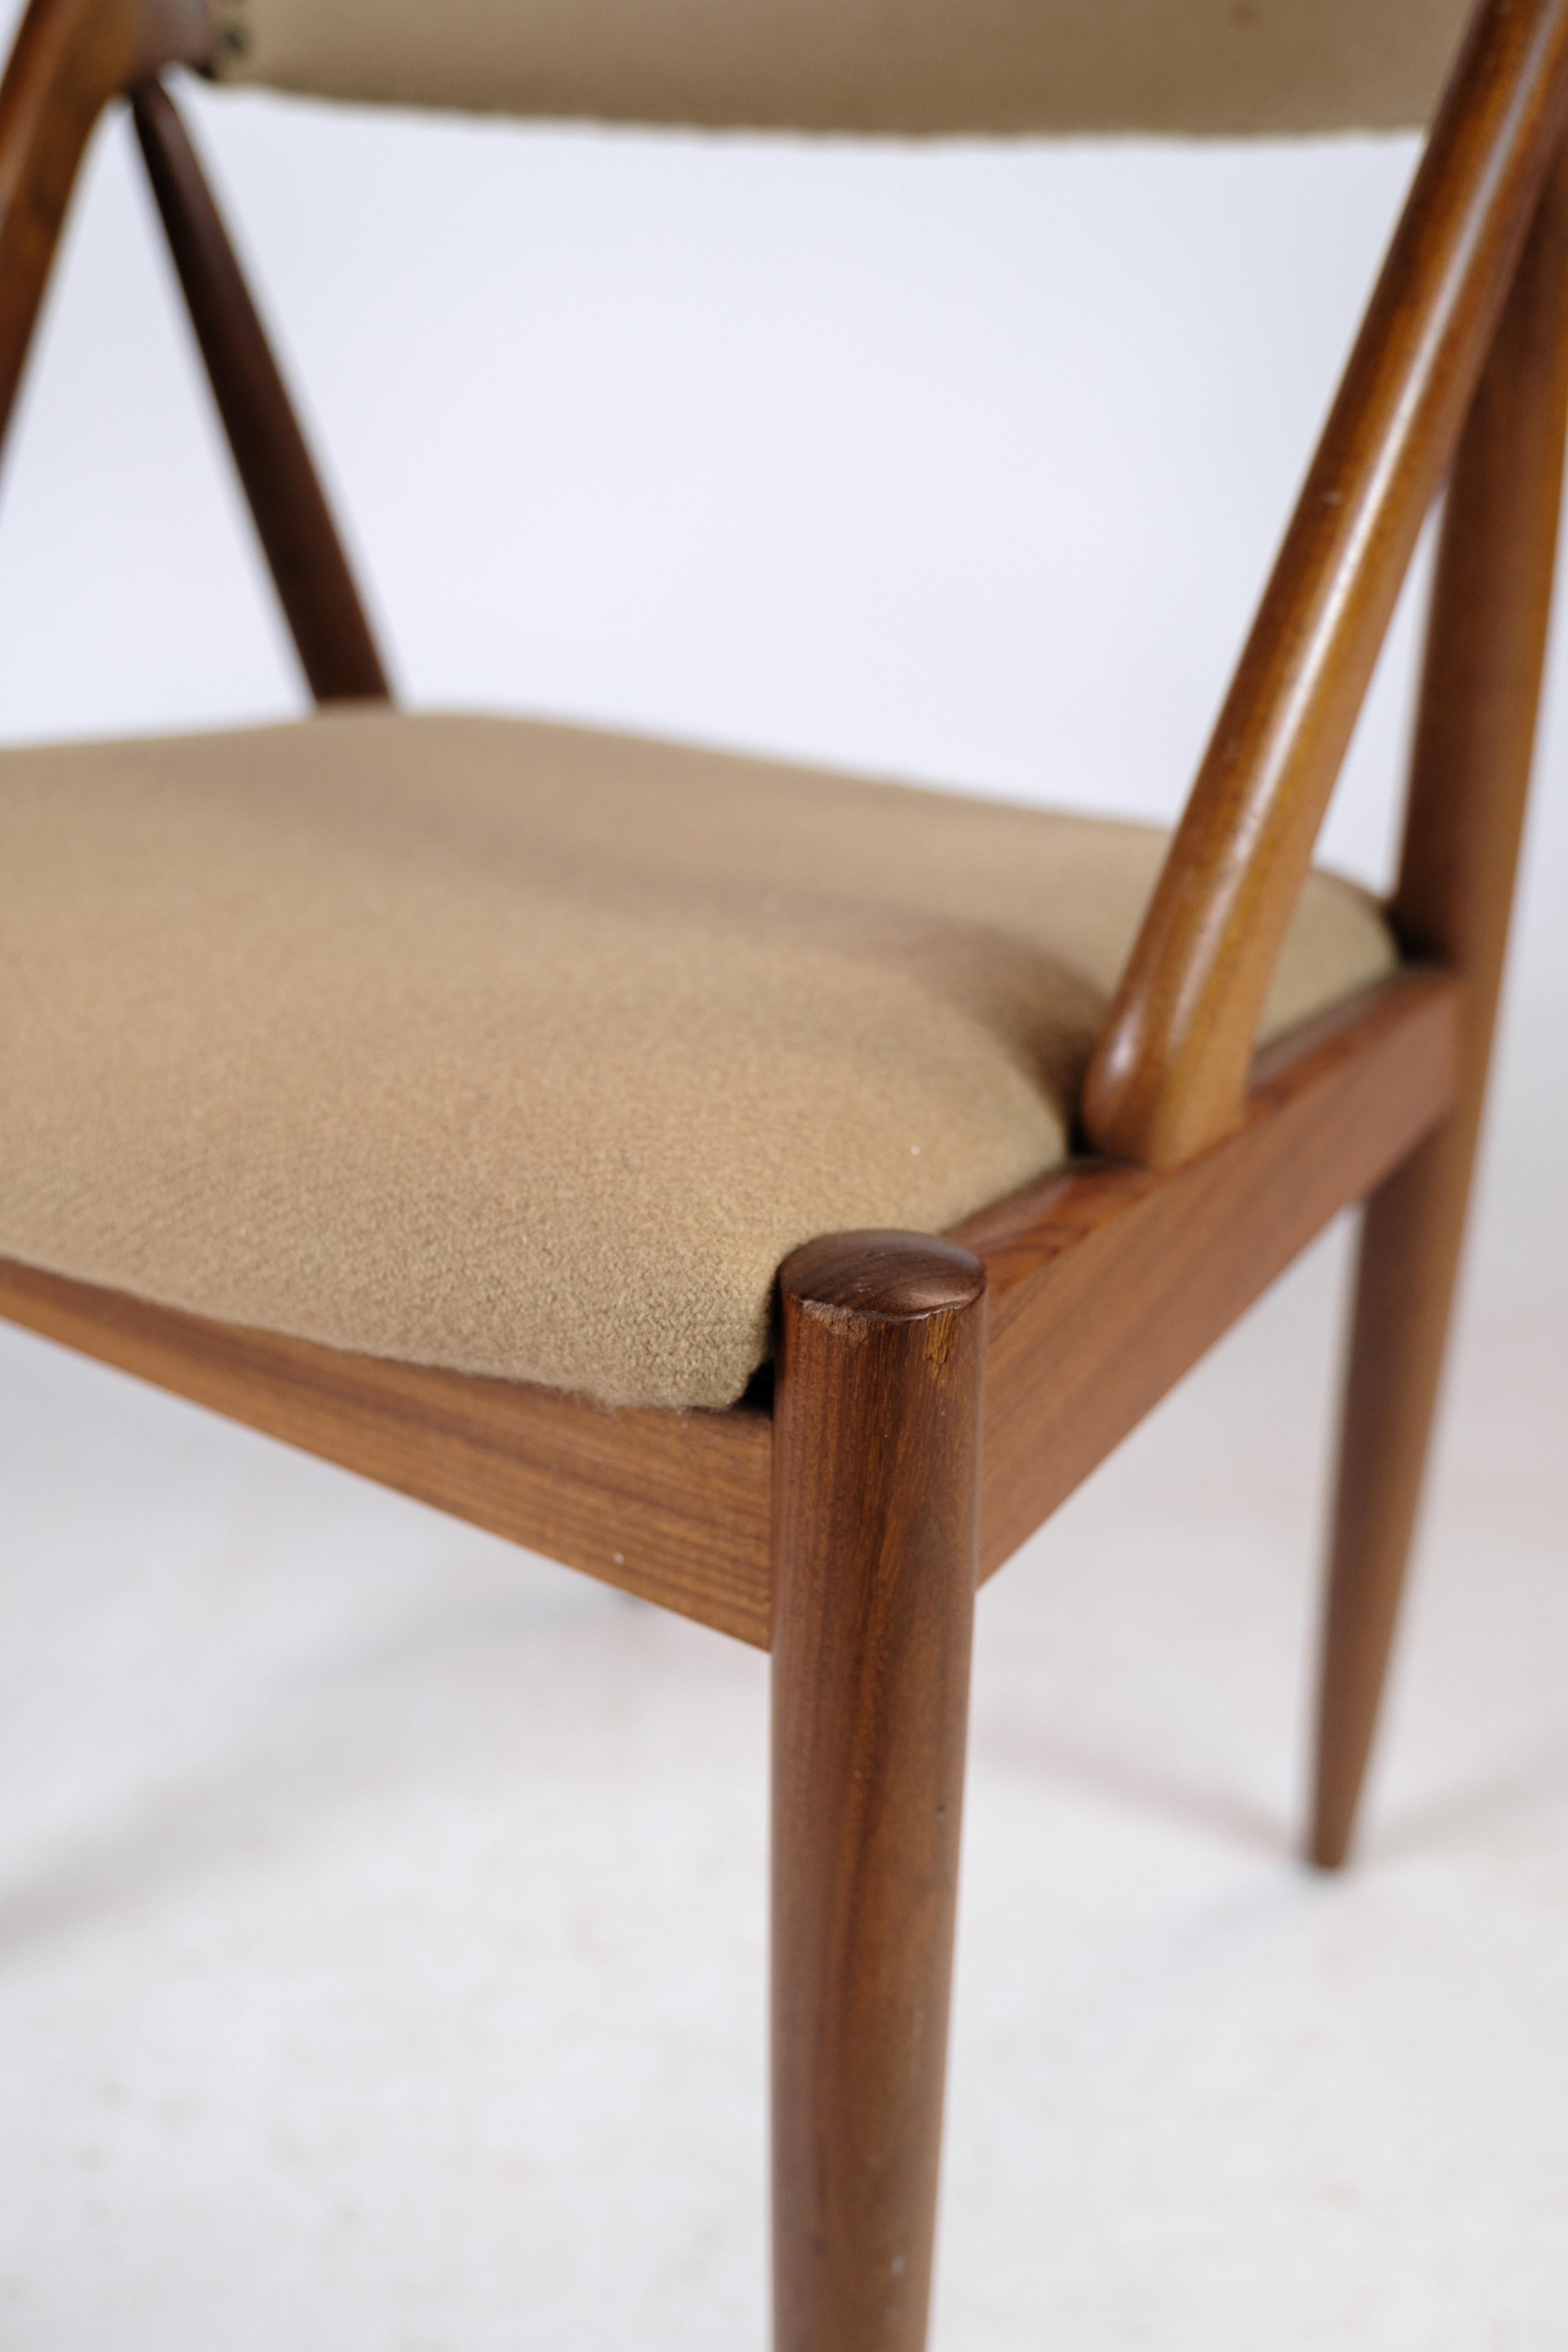 4 Dining Room Chairs Model 31 Made In Teak, Designed By Kai Kristiansen For Sale 3